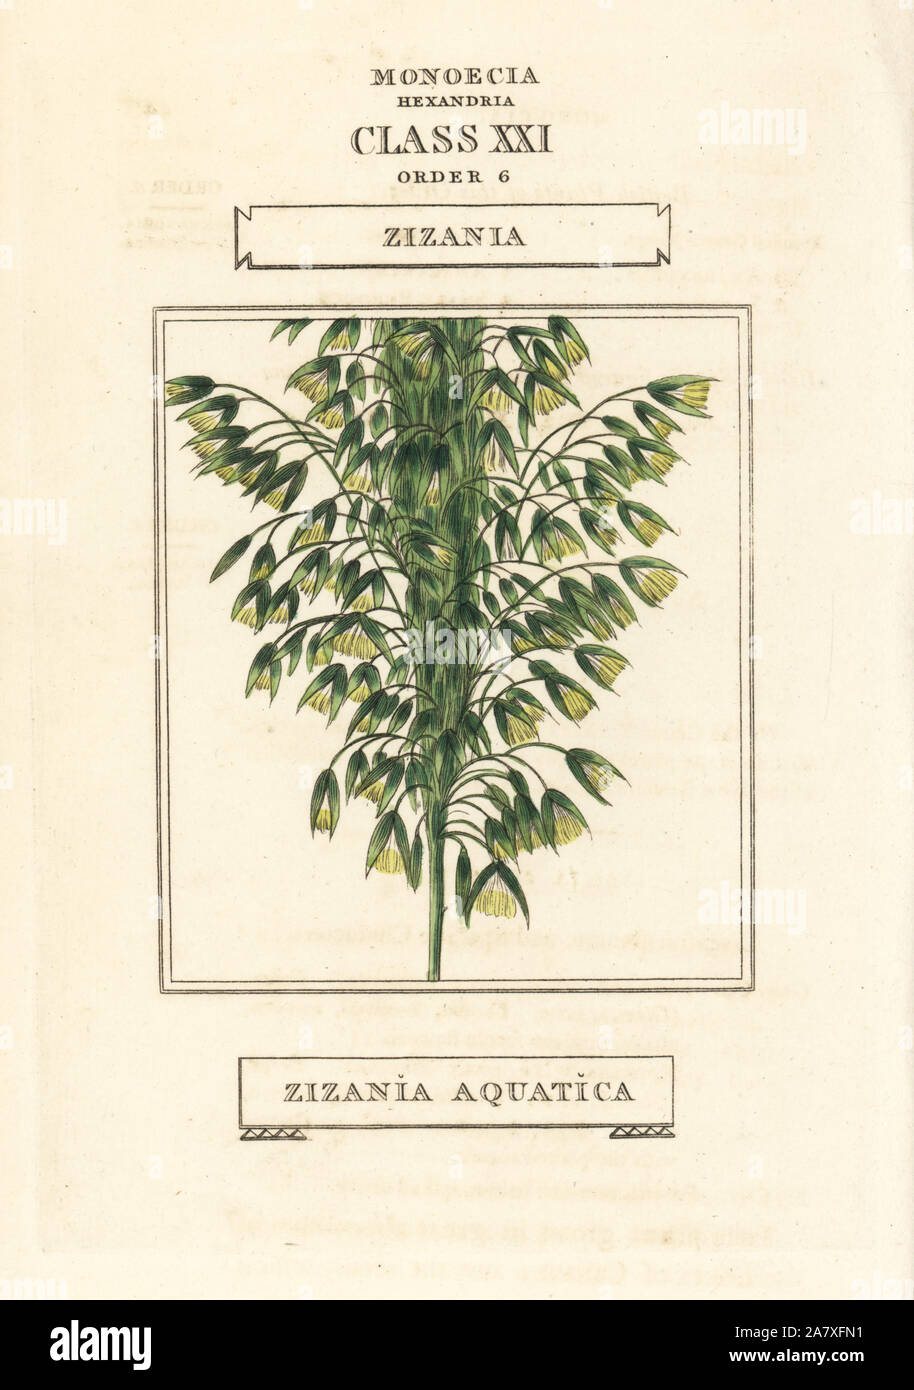 Wild rice, Zizania aquatica. Handcoloured copperplate engraving after an illustration by Richard Duppa from his The Classes and Orders of the Linnaean System of Botany, Longman, Hurst, London, 1816. Stock Photo